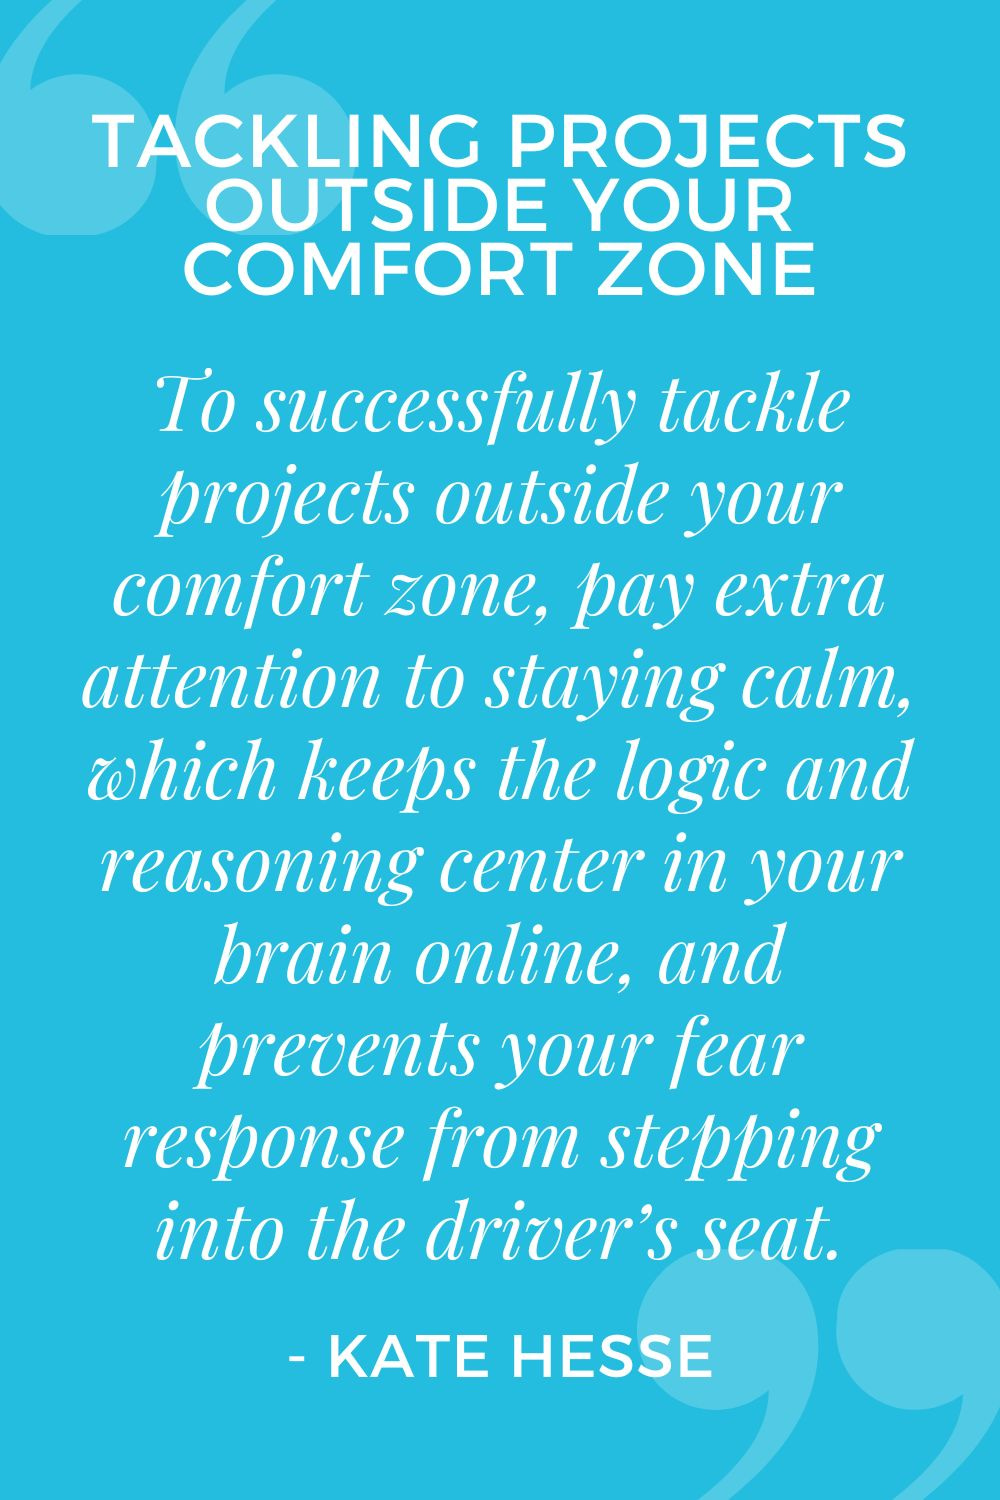 To successfully tackle projects outside your comfort zone, pay extra attention to staying calm, which keeps the logic and reasoning center in your brain online, and prevents your fear response from stepping into the driver's seat.